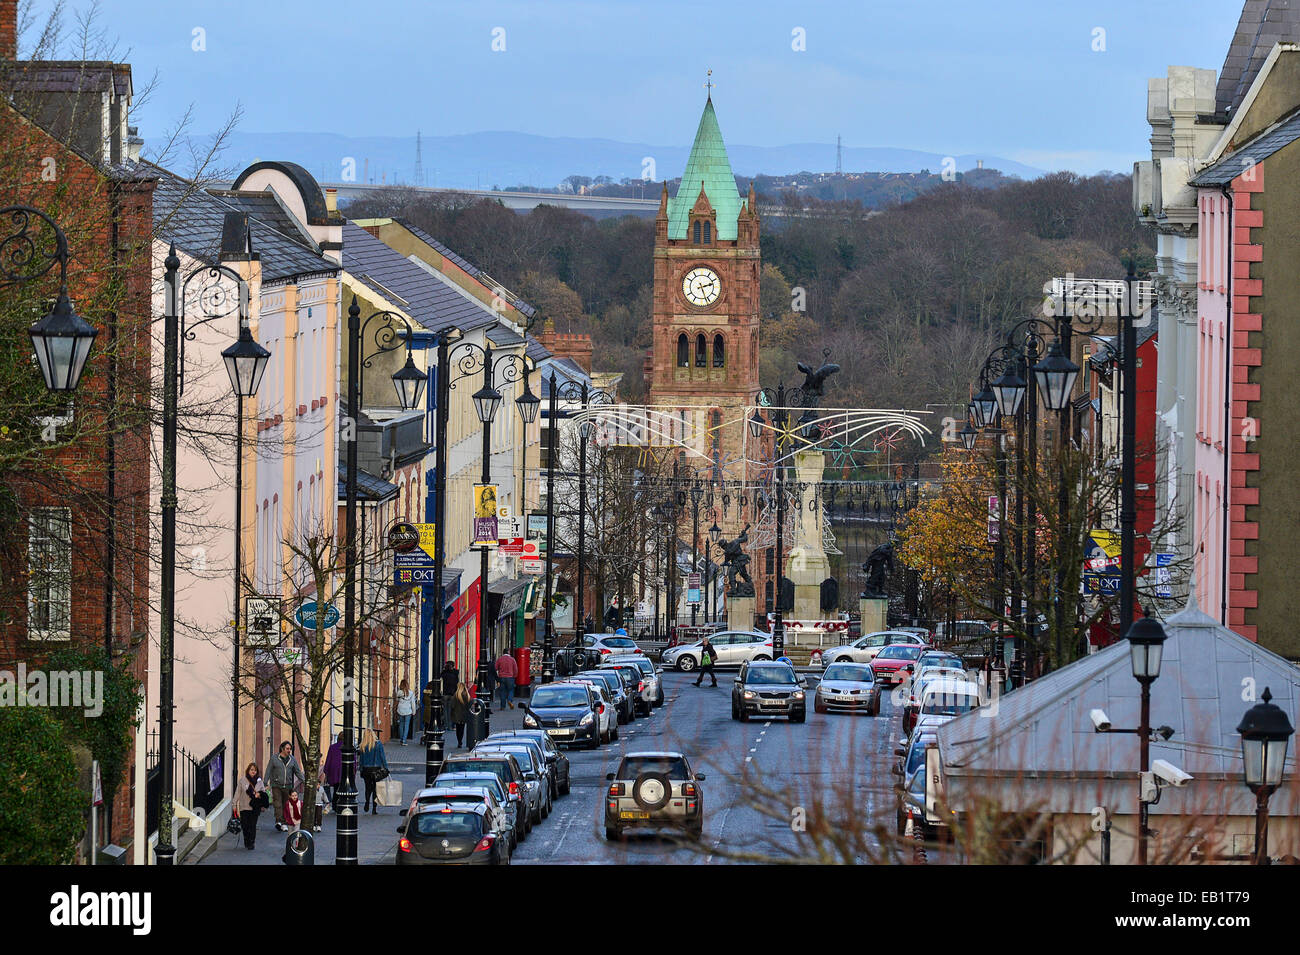 Bishop Street and Guildhall, Derry, Londonderry. Photo: George Sweeney/Alamy Stock Photo